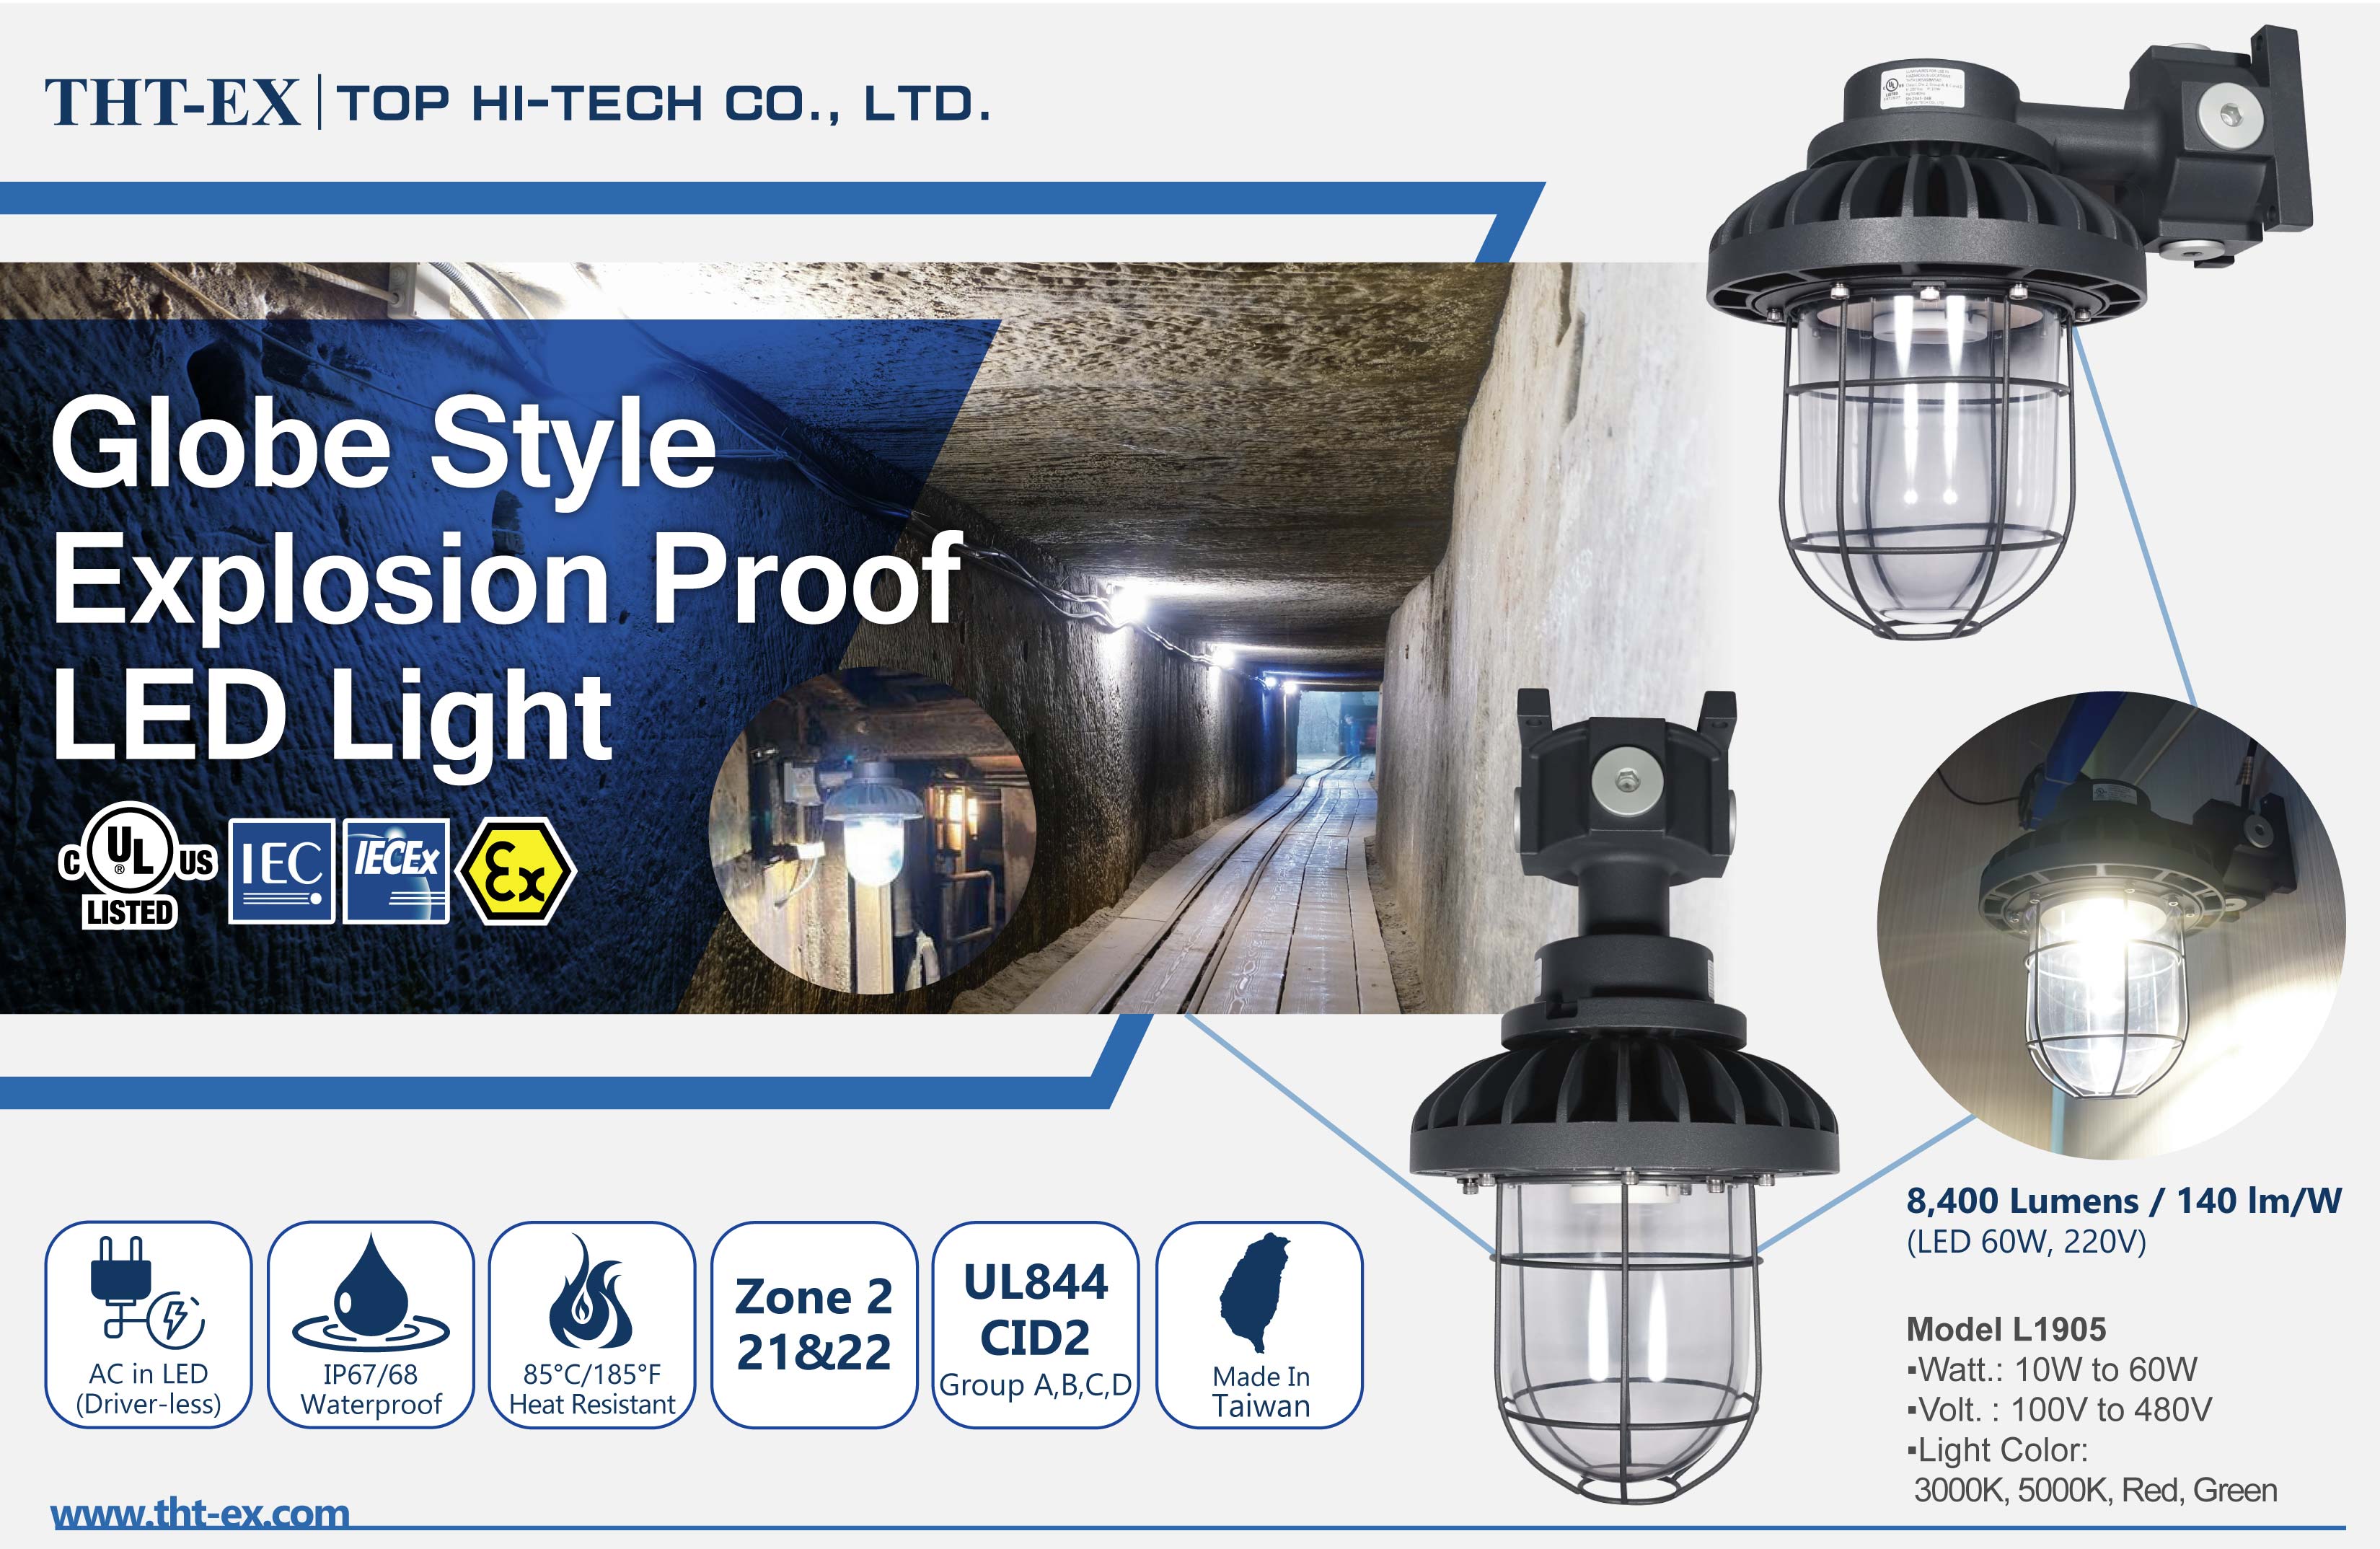 Globe Type Explosion Proof LED Light for Tunnel, Area and Low Bay Lighting Applications